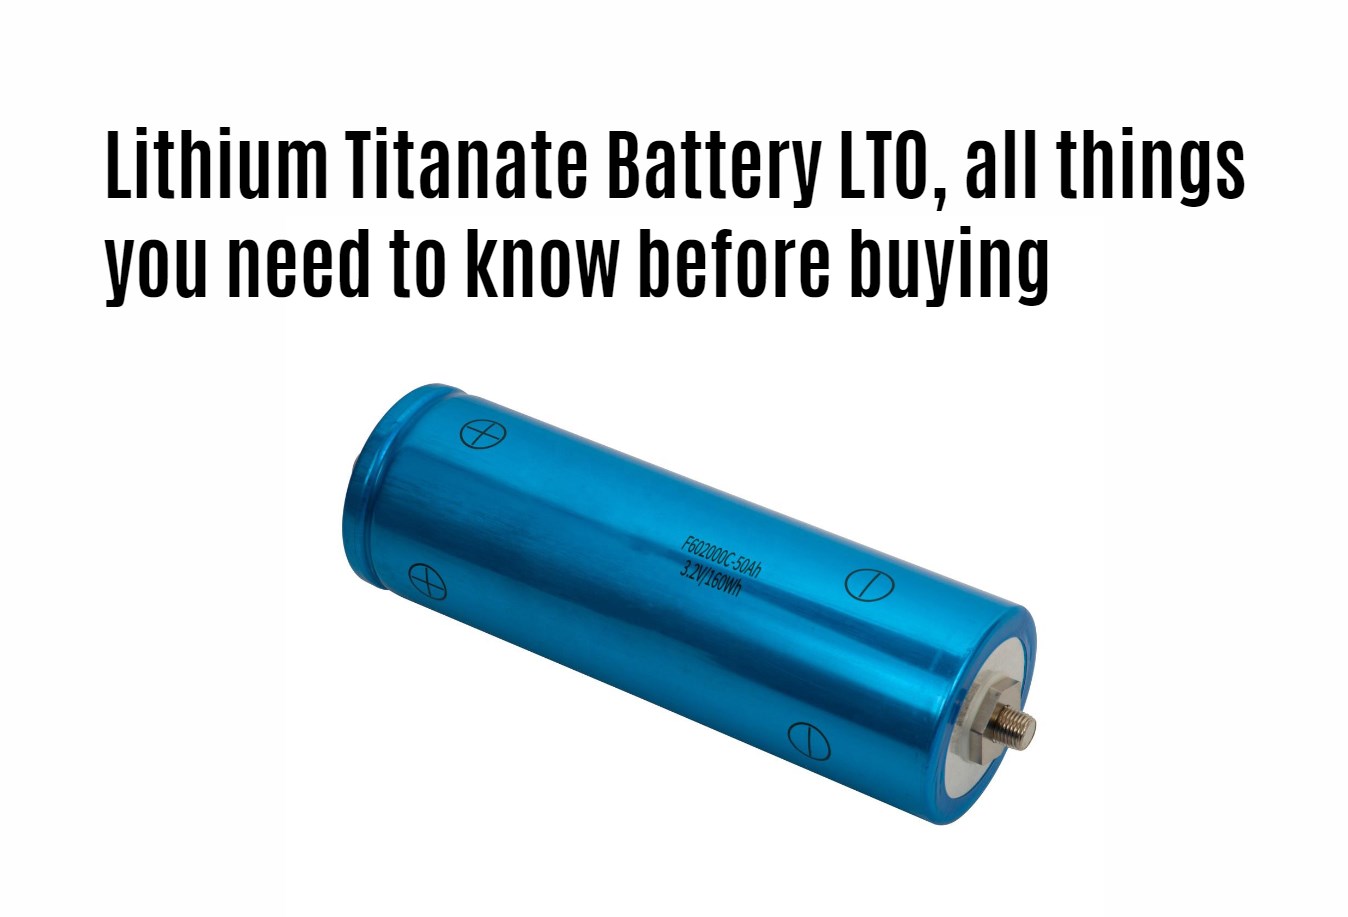 Lithium Titanate Battery LTO, all things you need to know before buying